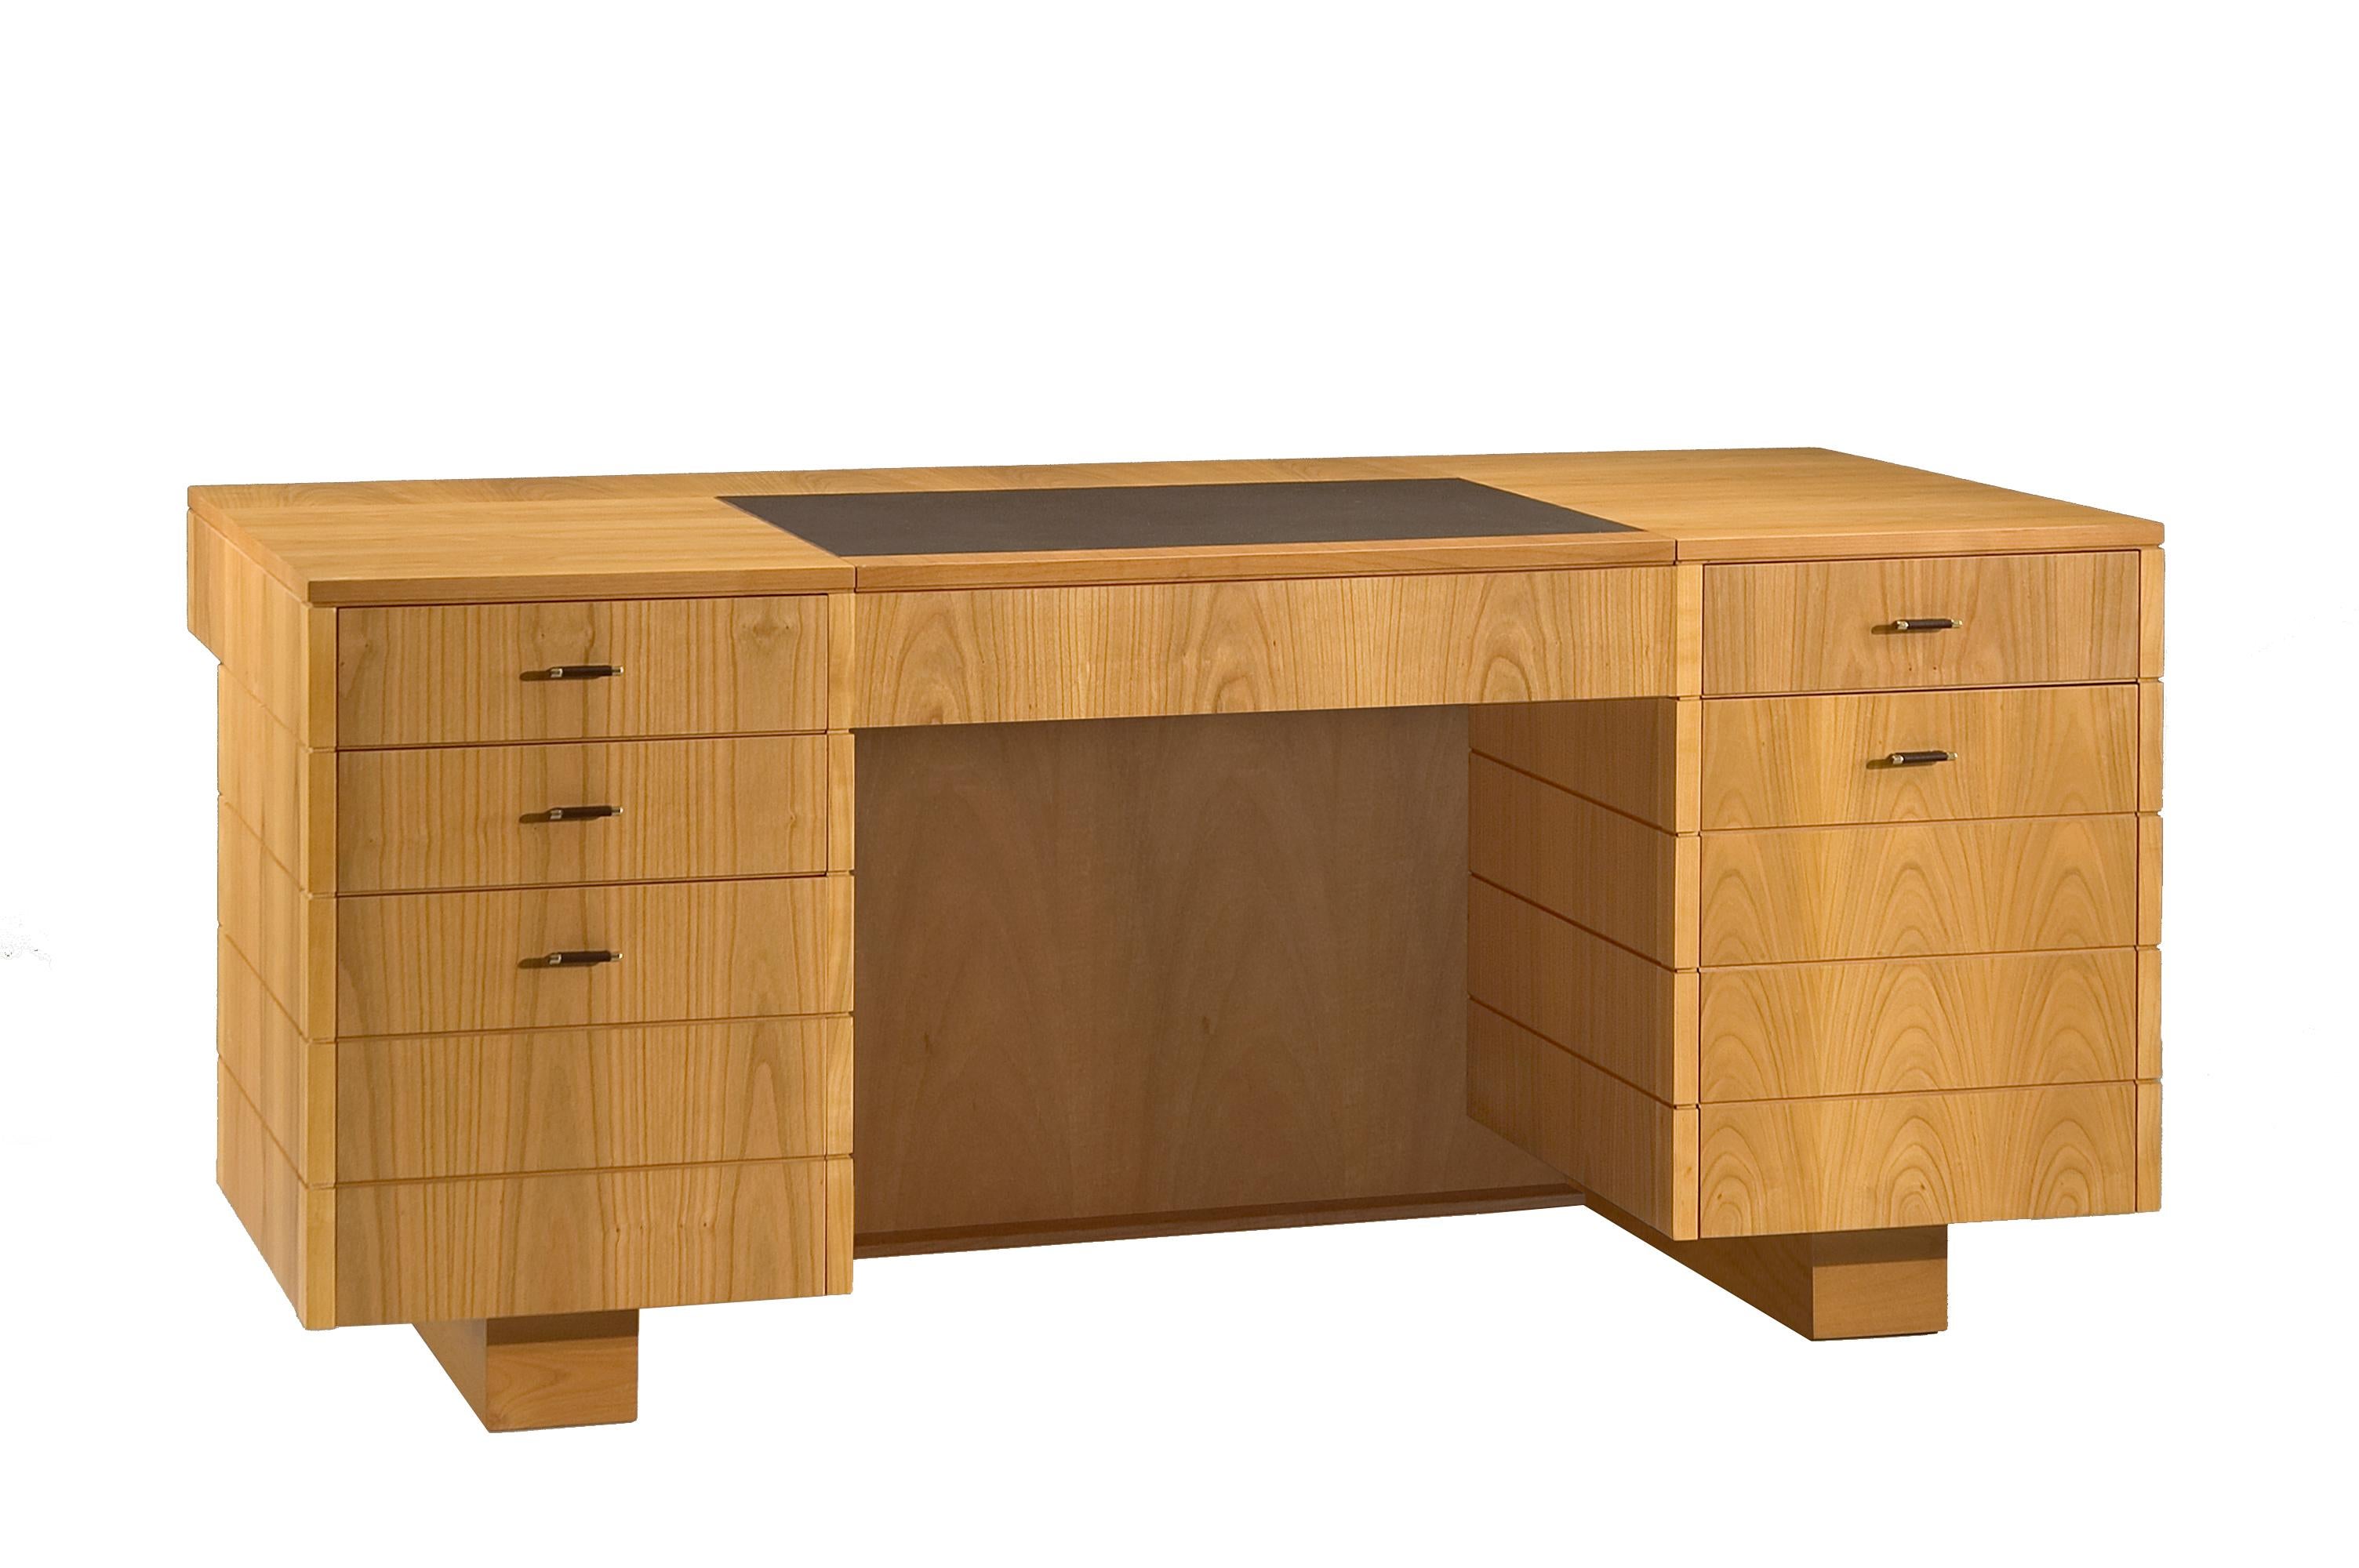 Wooden Desk Made of Cherry Wood with Leather Top and Drawers, by Morelato 2